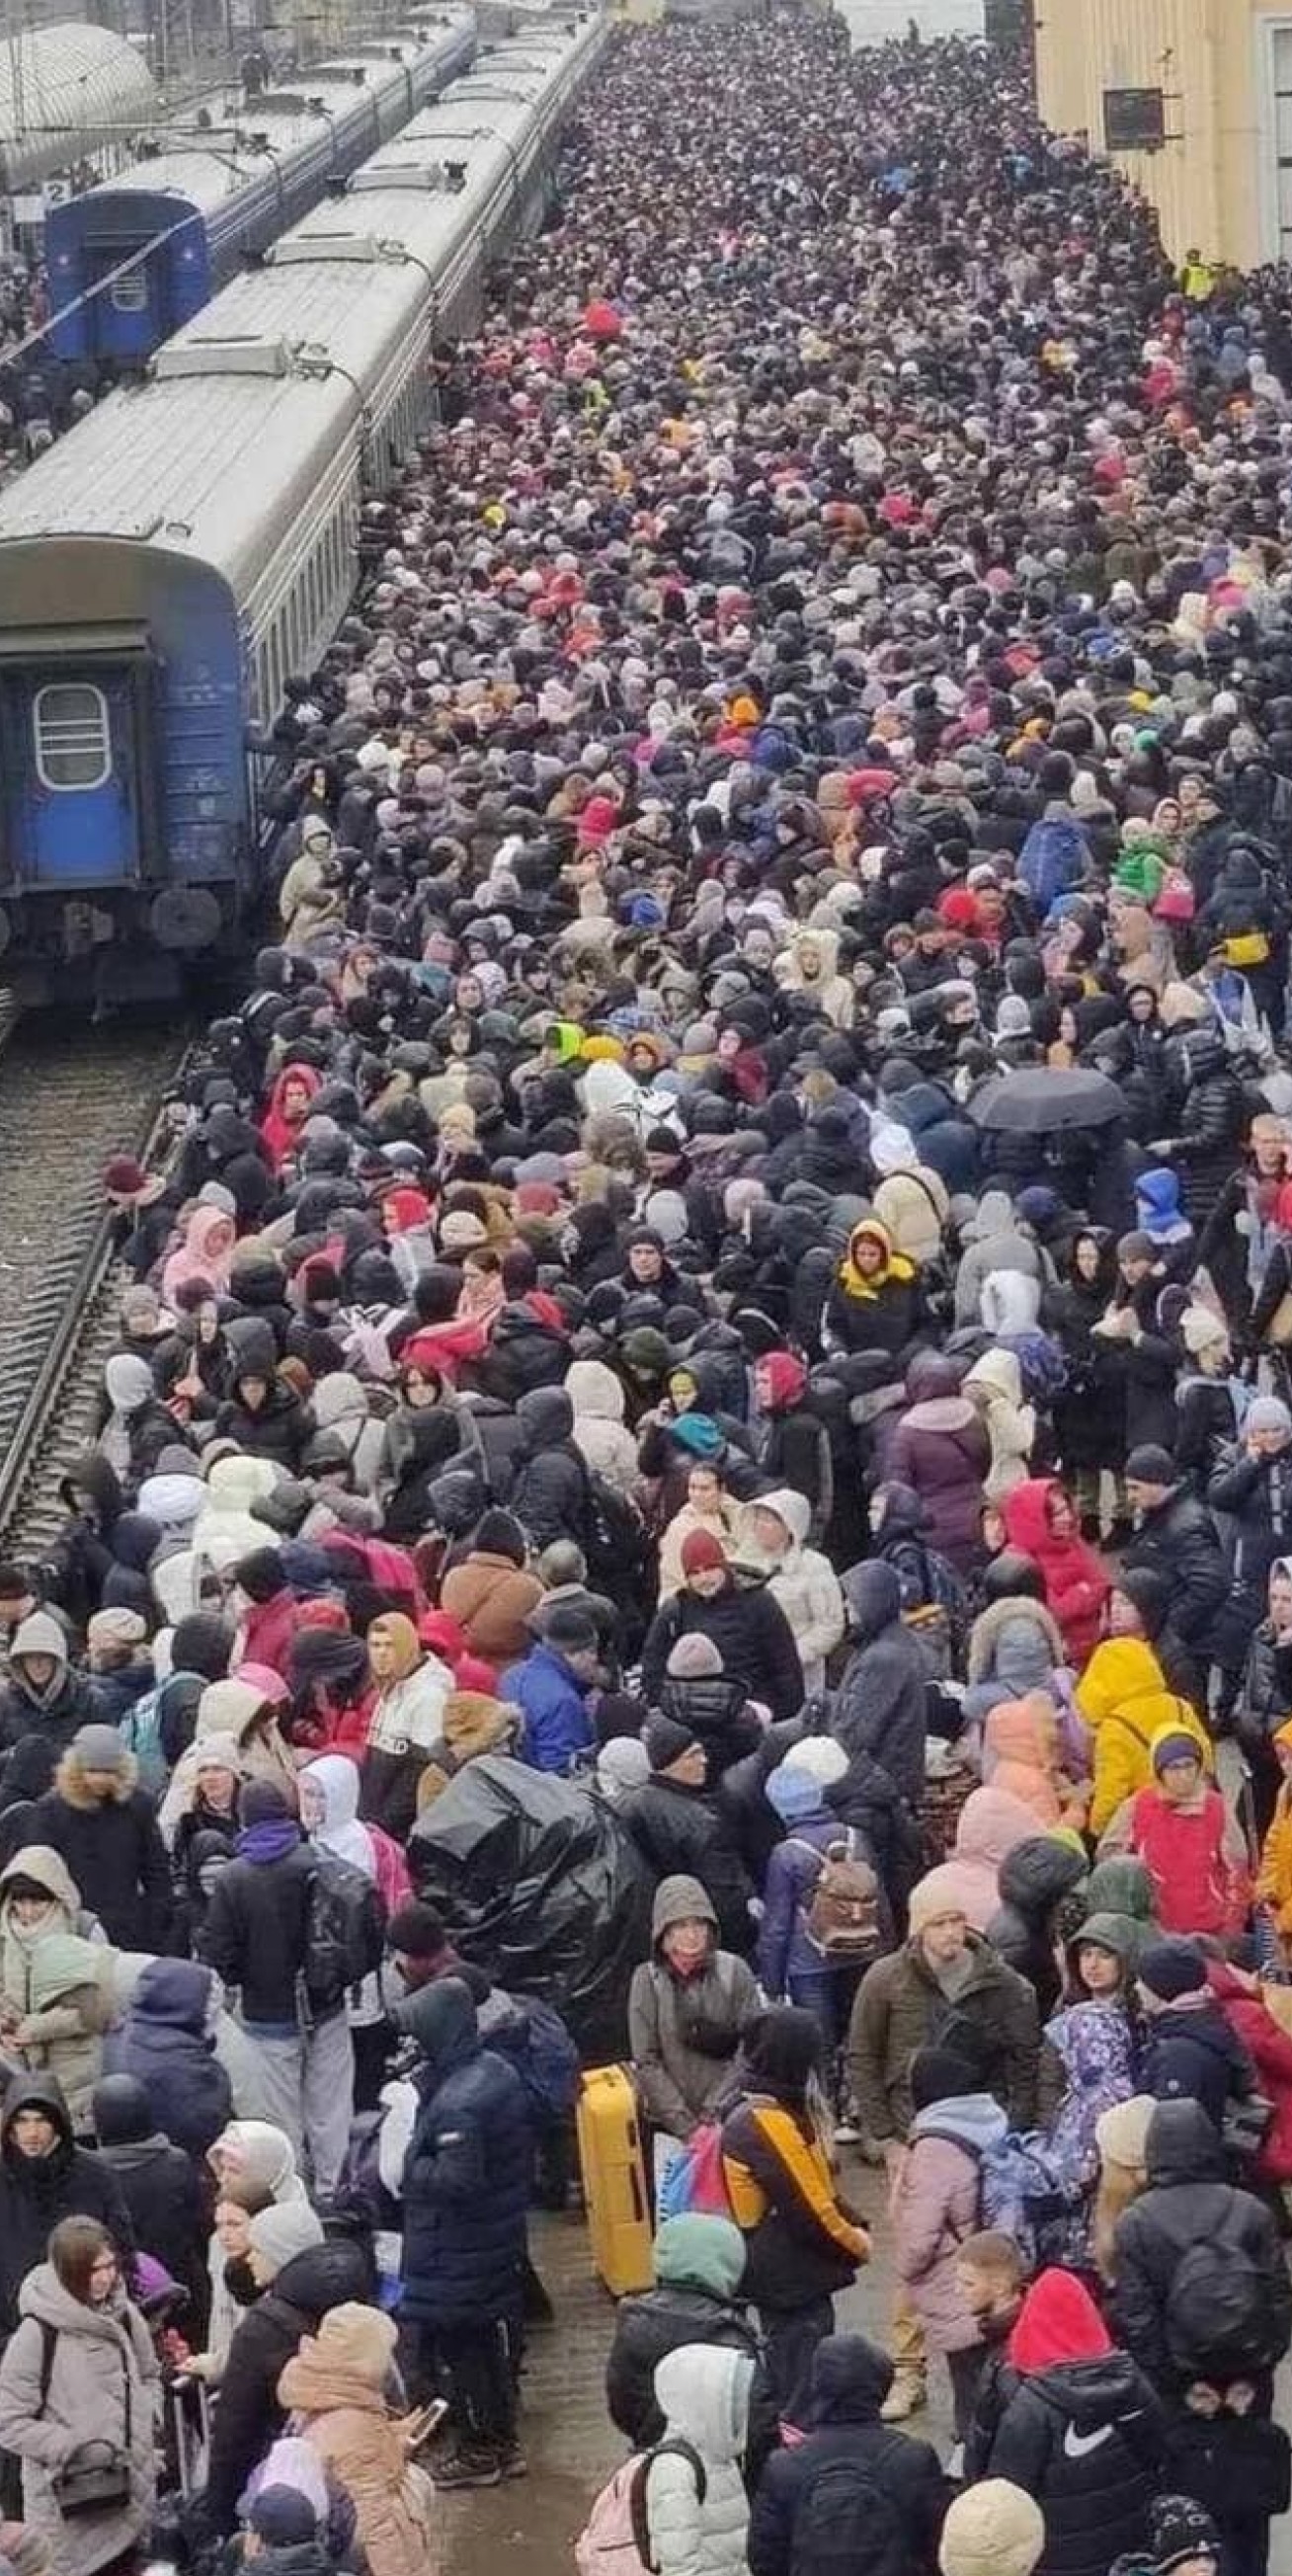 Ukrainian people fleeing the war, taken by refugees on their way to France